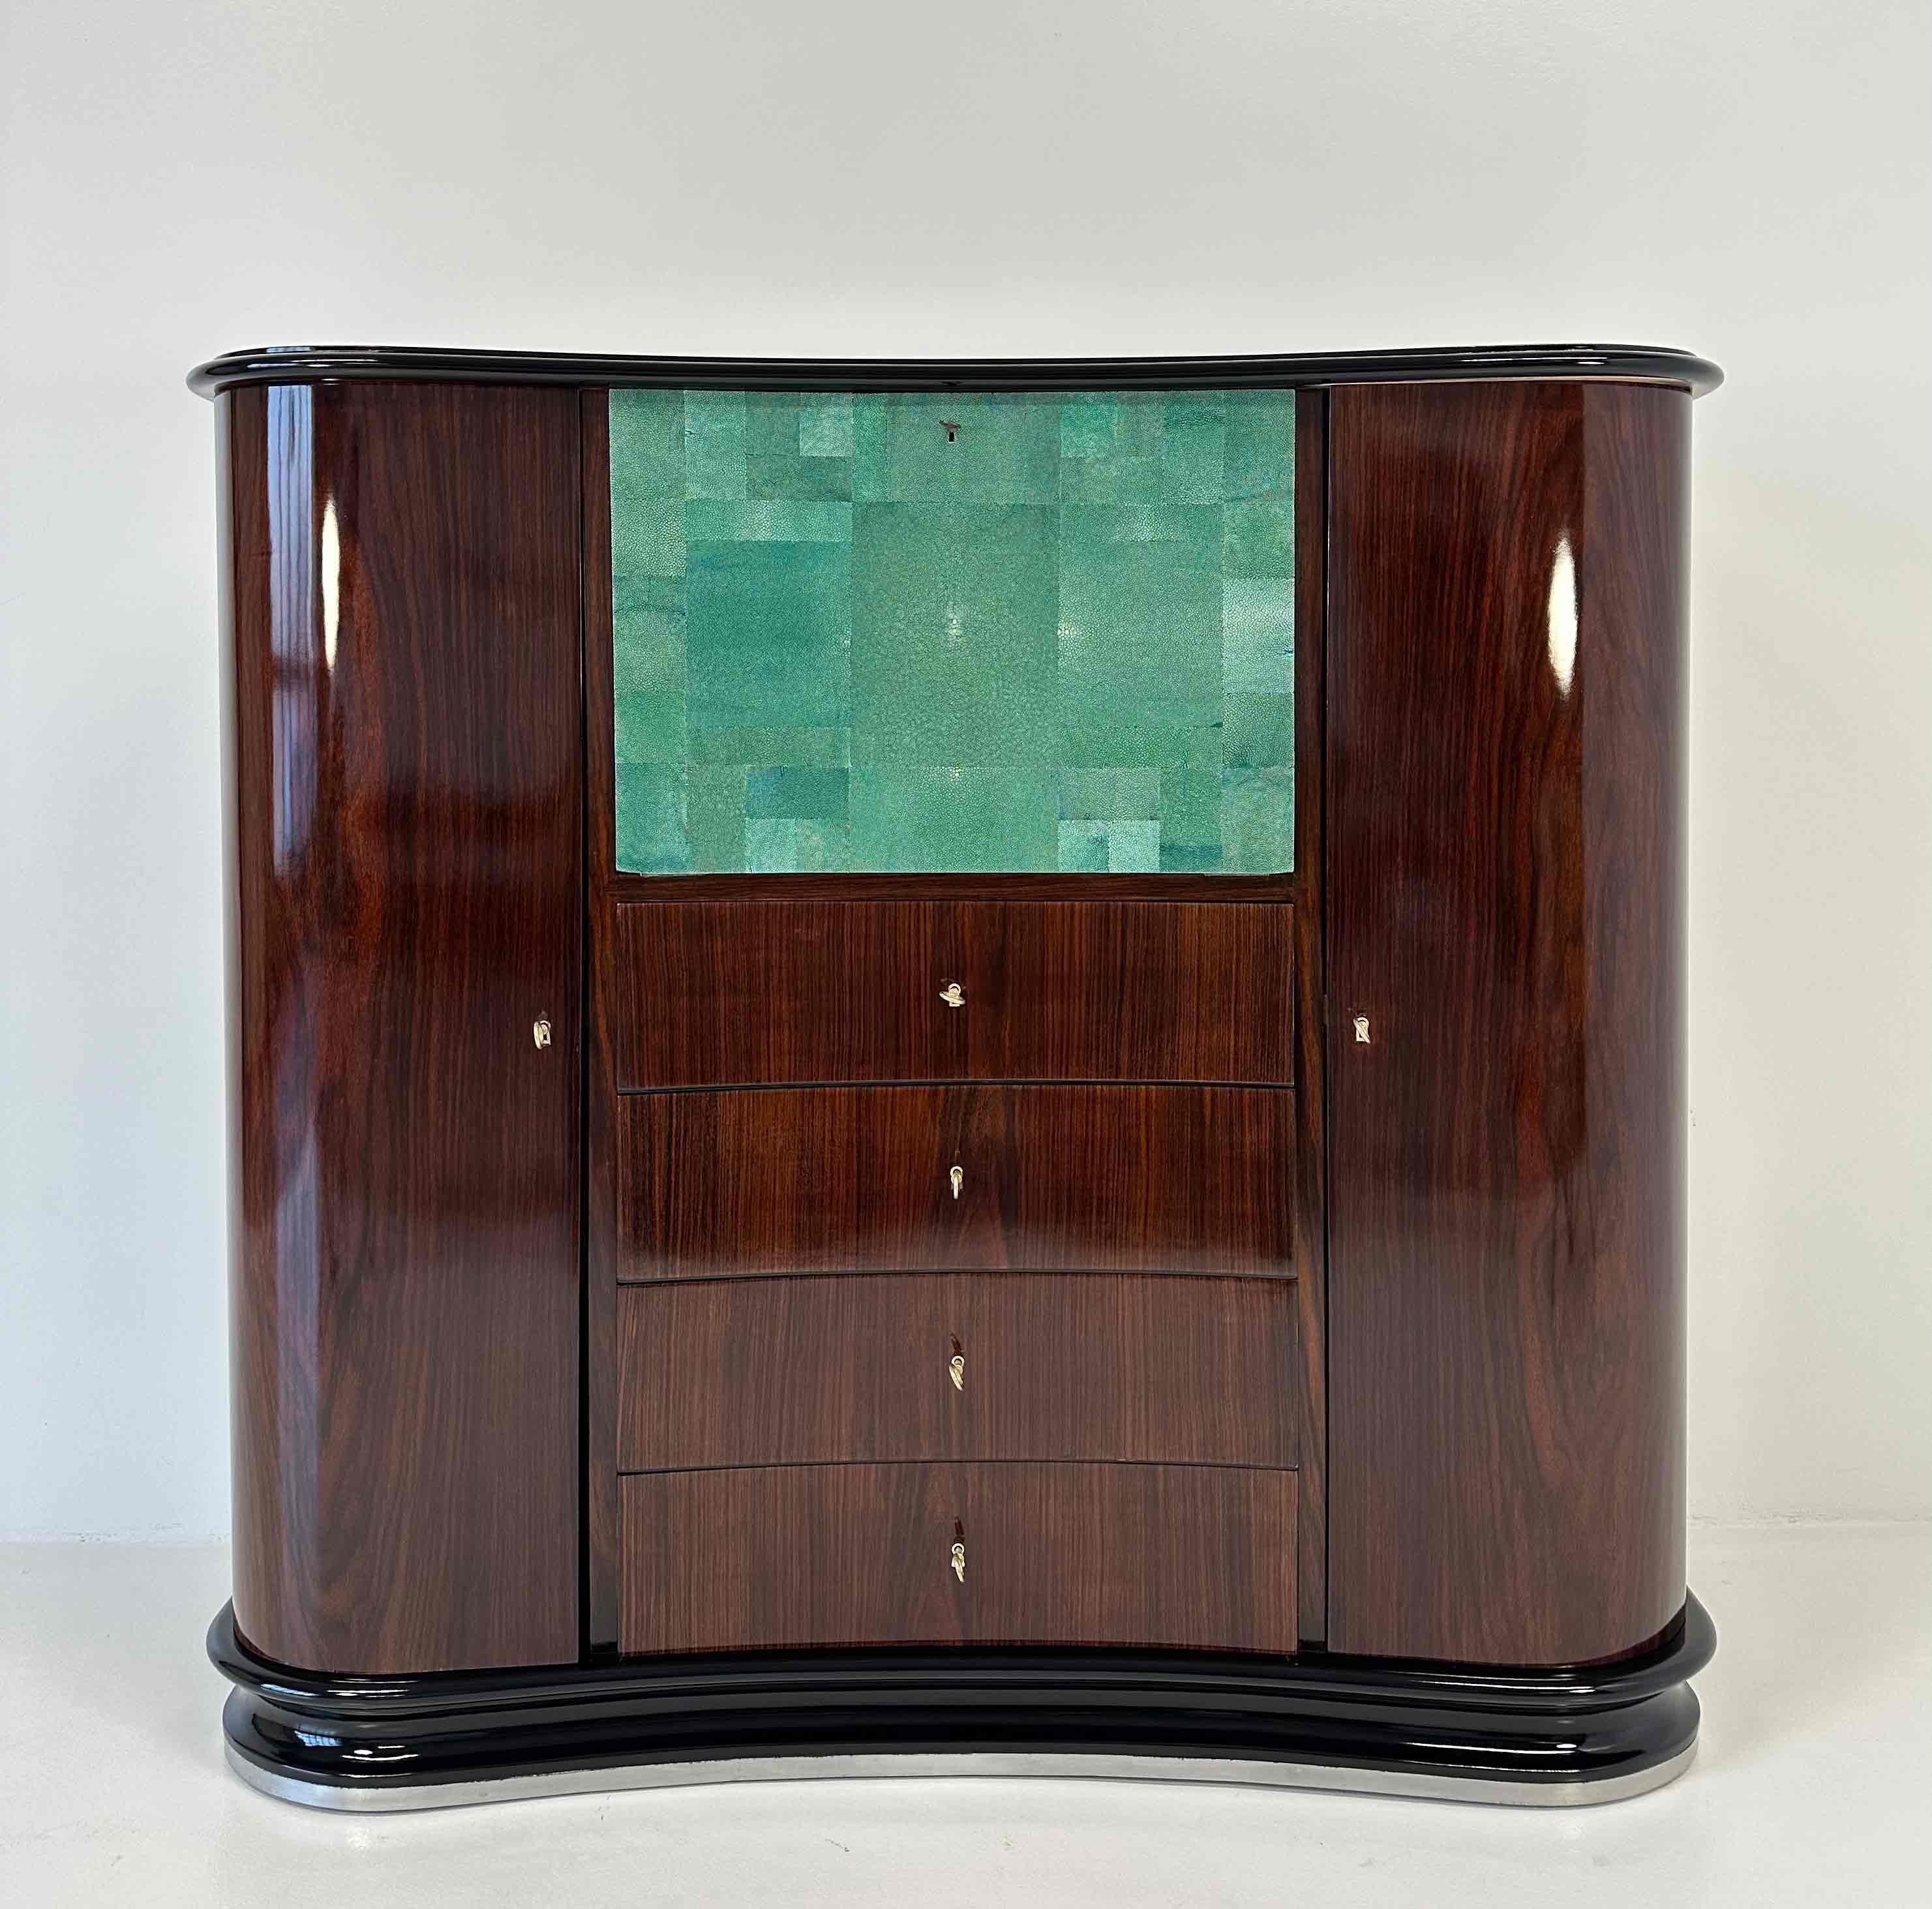 This Art Deco secretaire was produced in Italy in the 1940s and is attributable to Osvaldo Borsani. It is completely in an exotic wood with a black lacquered top and base. The central folding door is covered with aquamarine colored shagreen